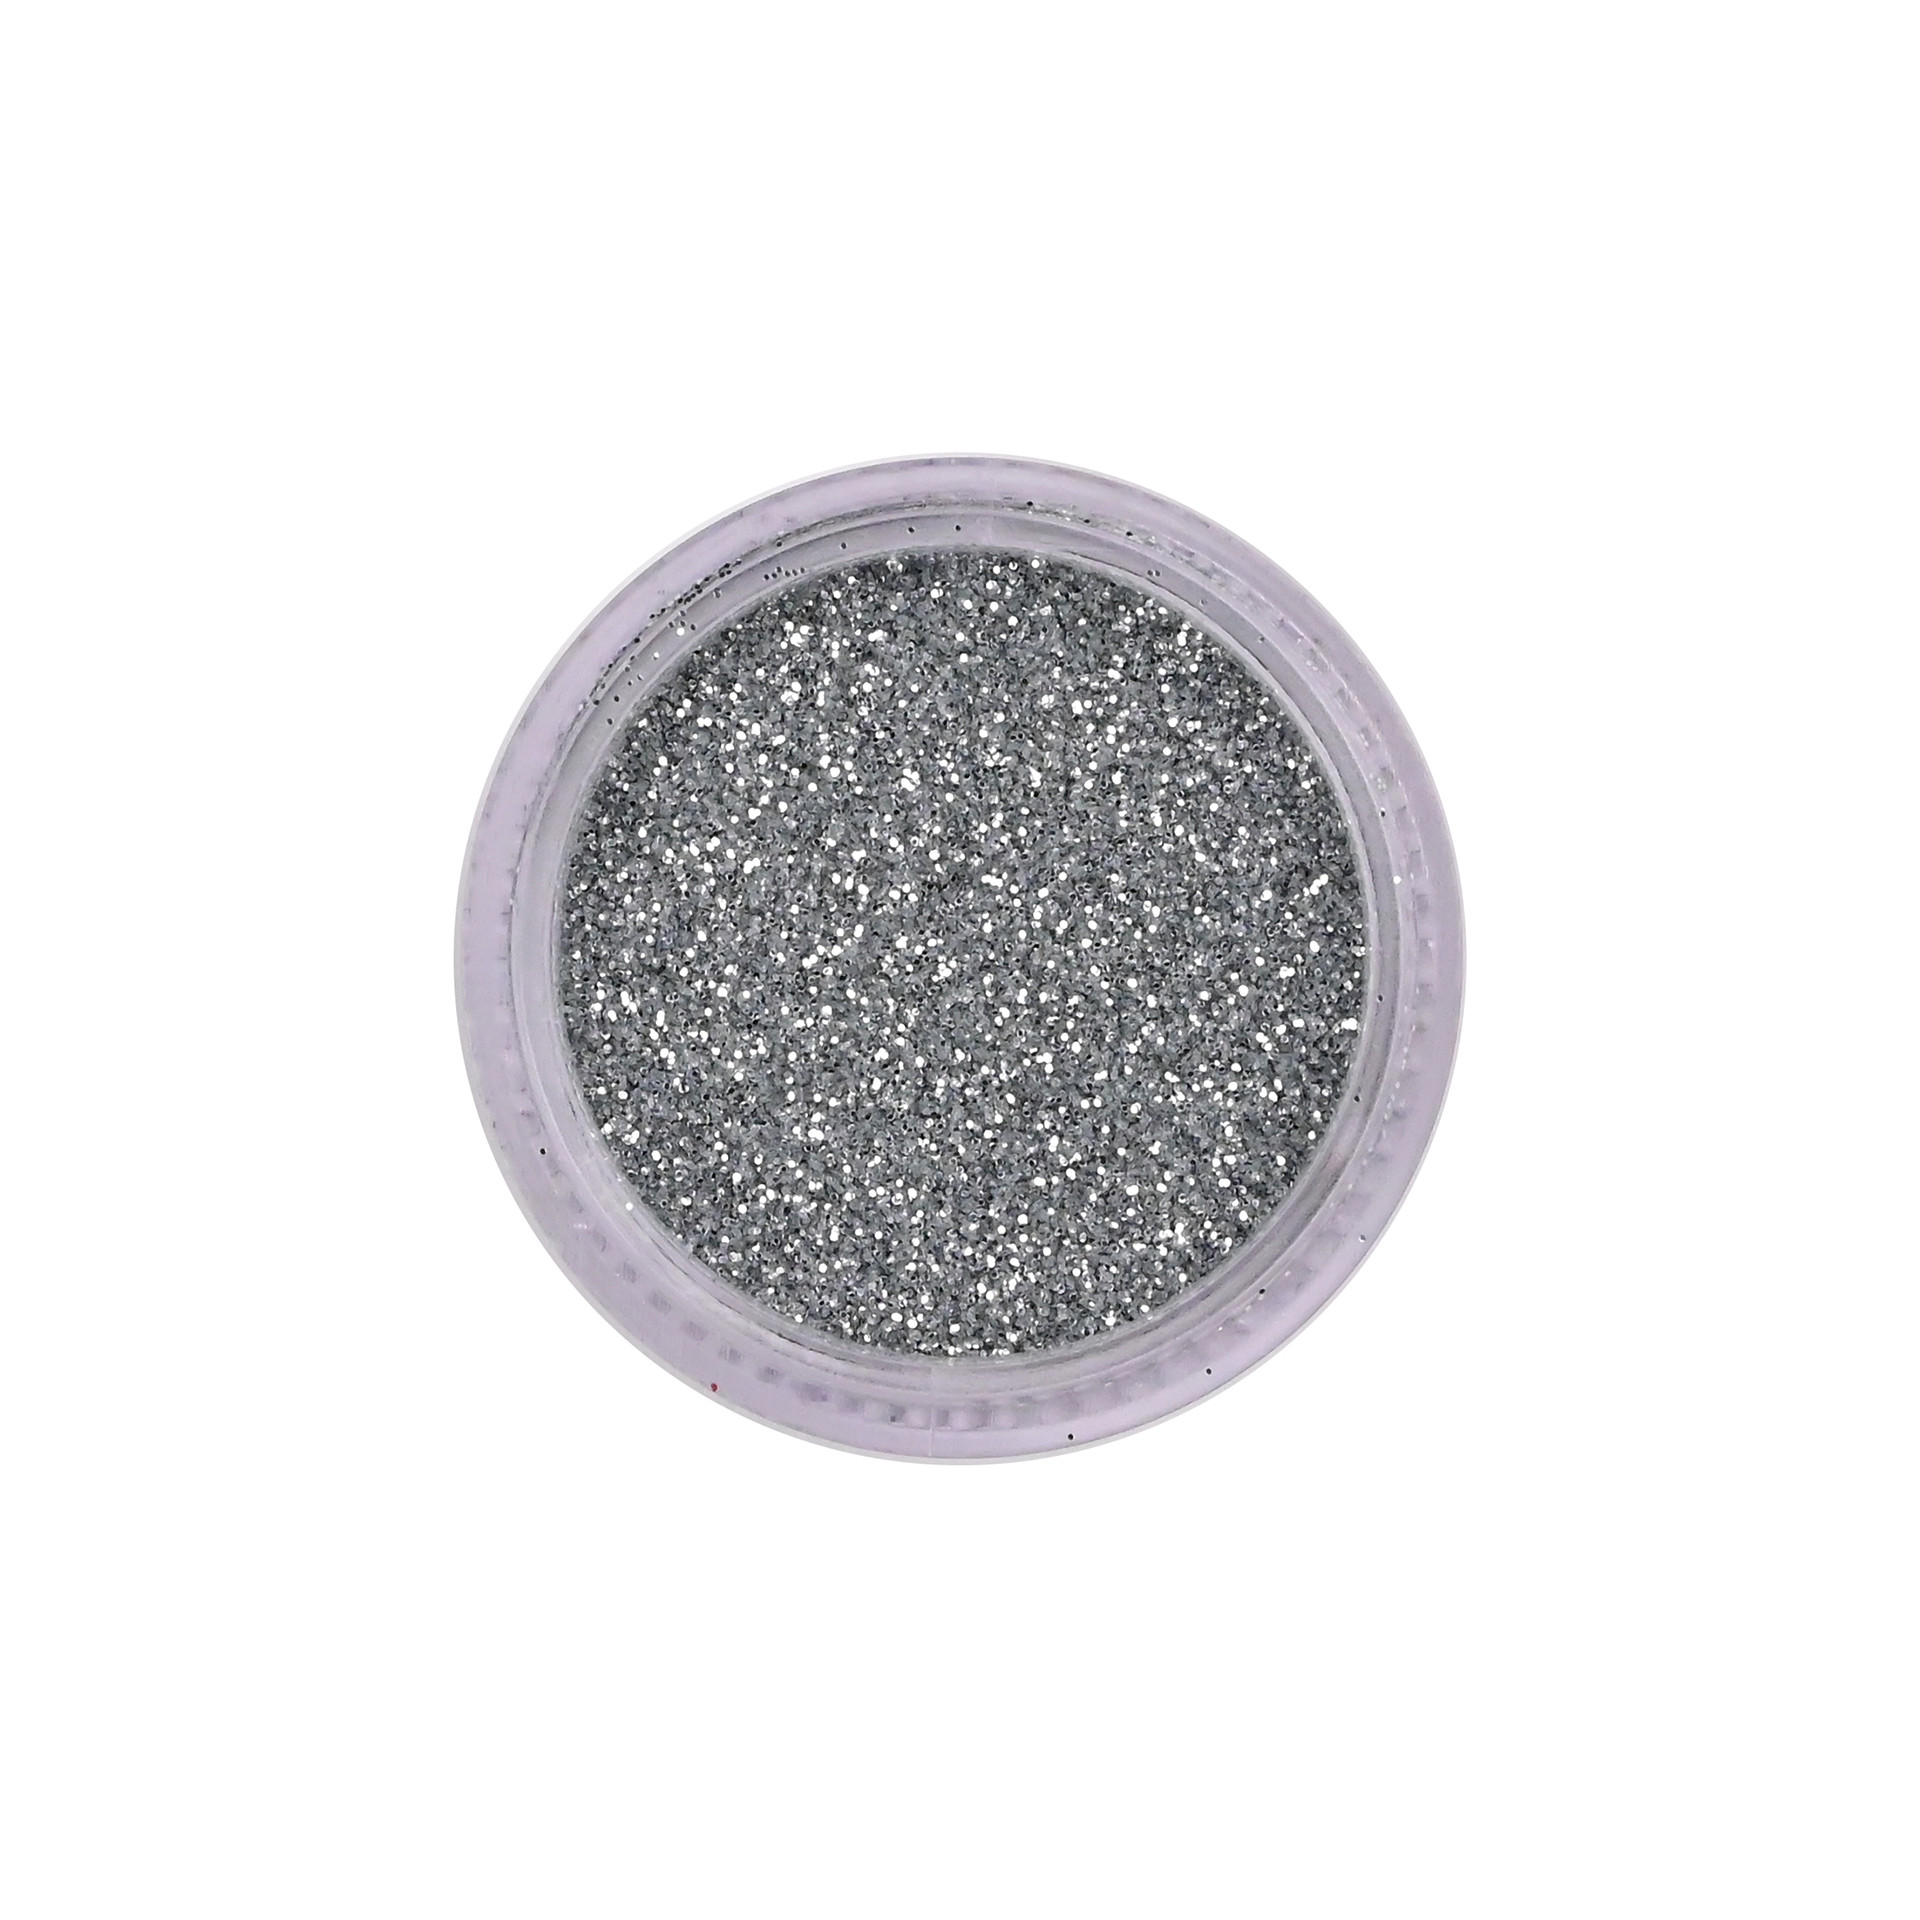 Small Silver Glitters for nails, face and body